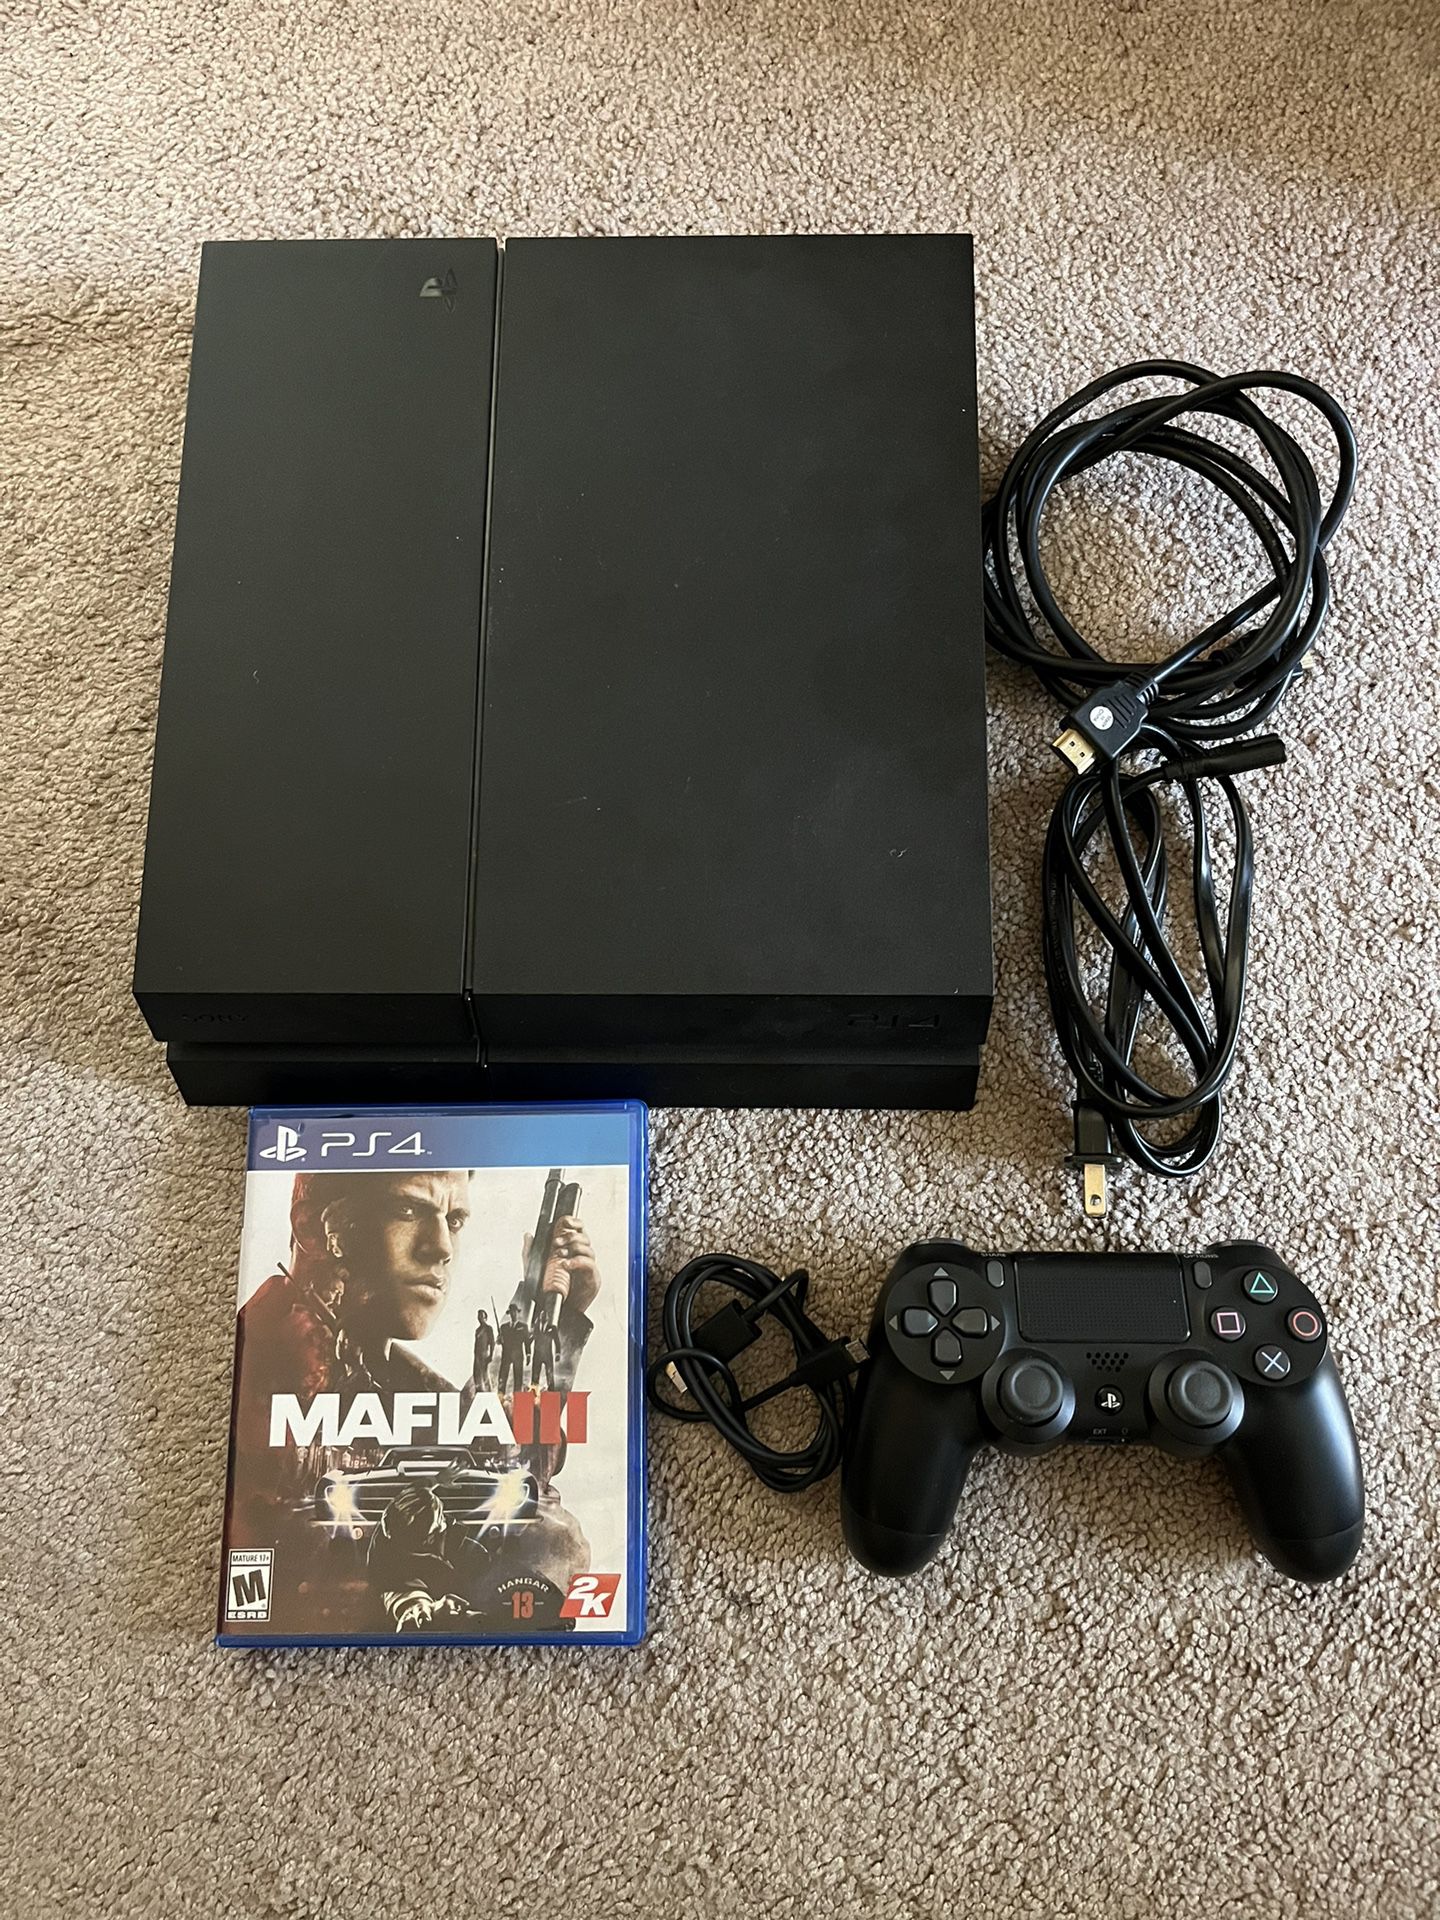 Sony PlayStation 4 PS4 500GB Console w/ Controller and Game